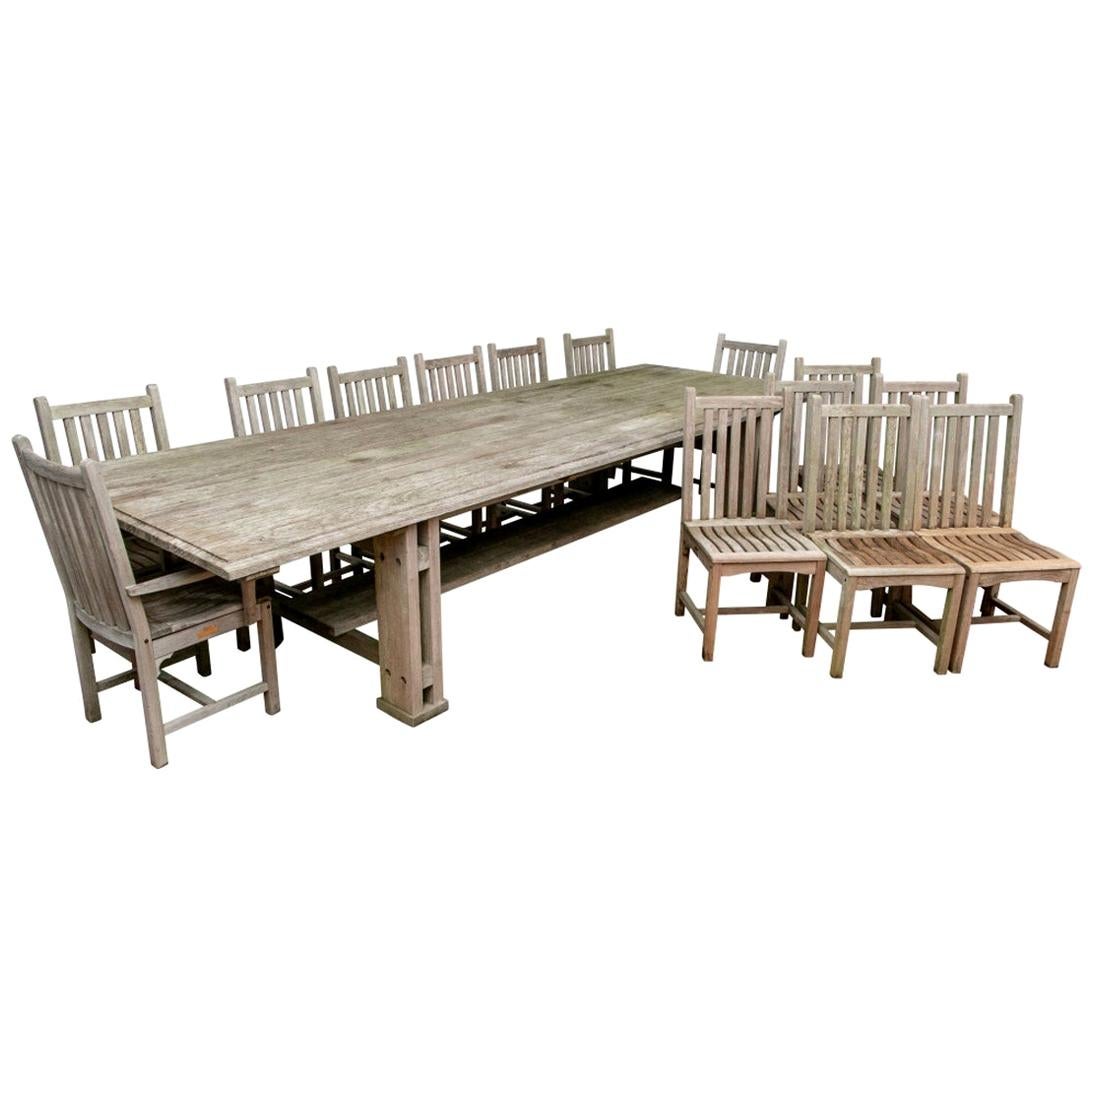 Grand Scale Kingsley Bate Teak Table with 14 Chairs